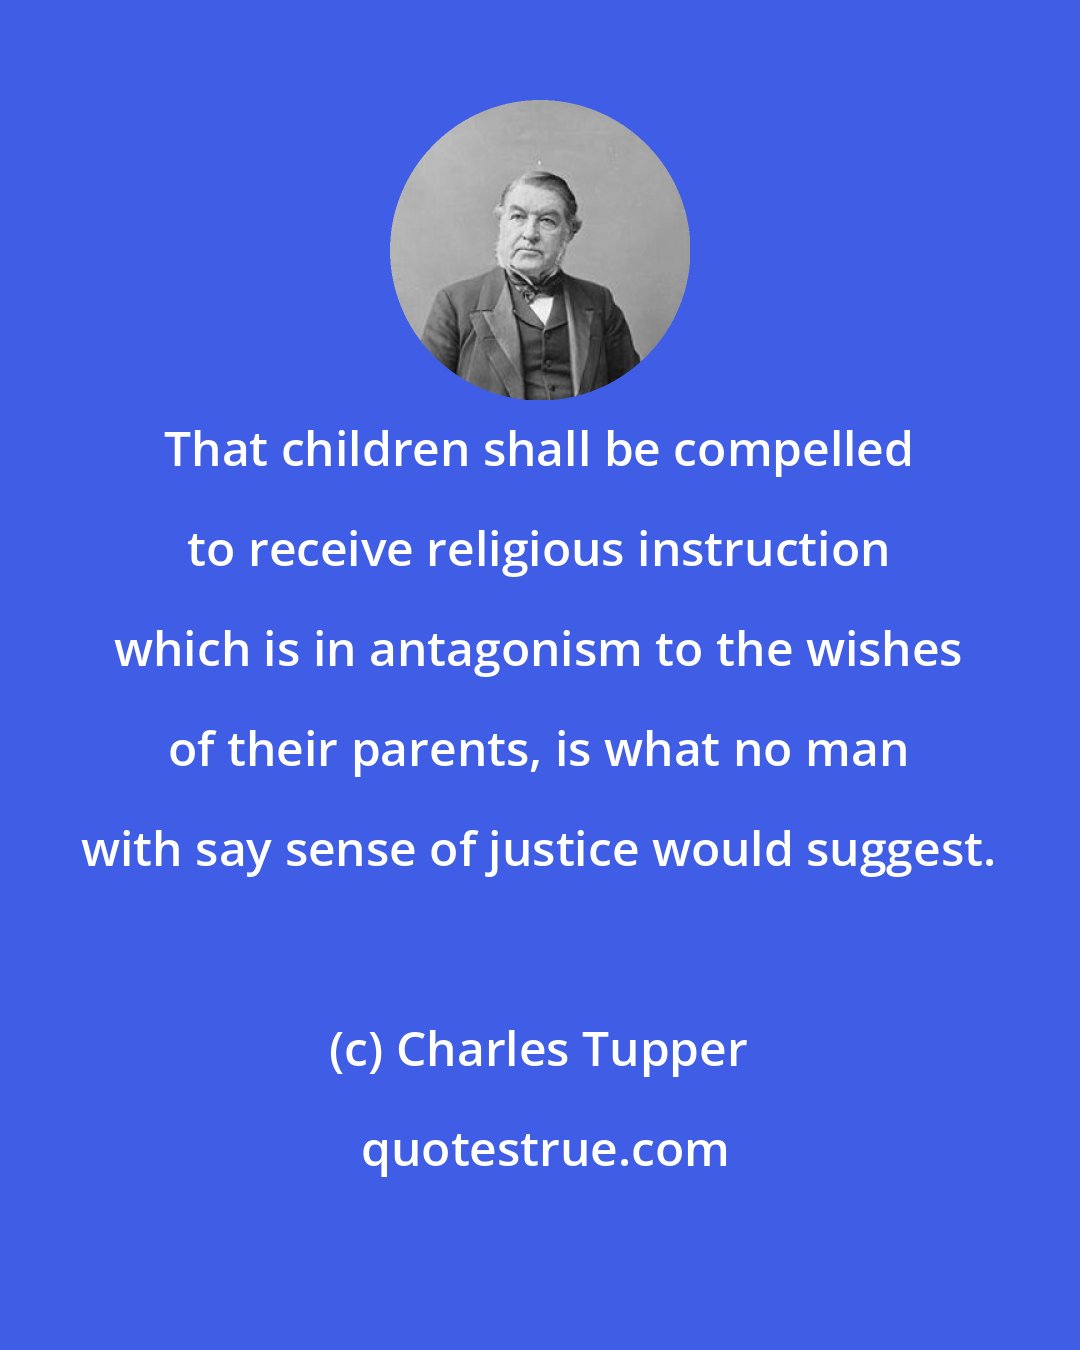 Charles Tupper: That children shall be compelled to receive religious instruction which is in antagonism to the wishes of their parents, is what no man with say sense of justice would suggest.